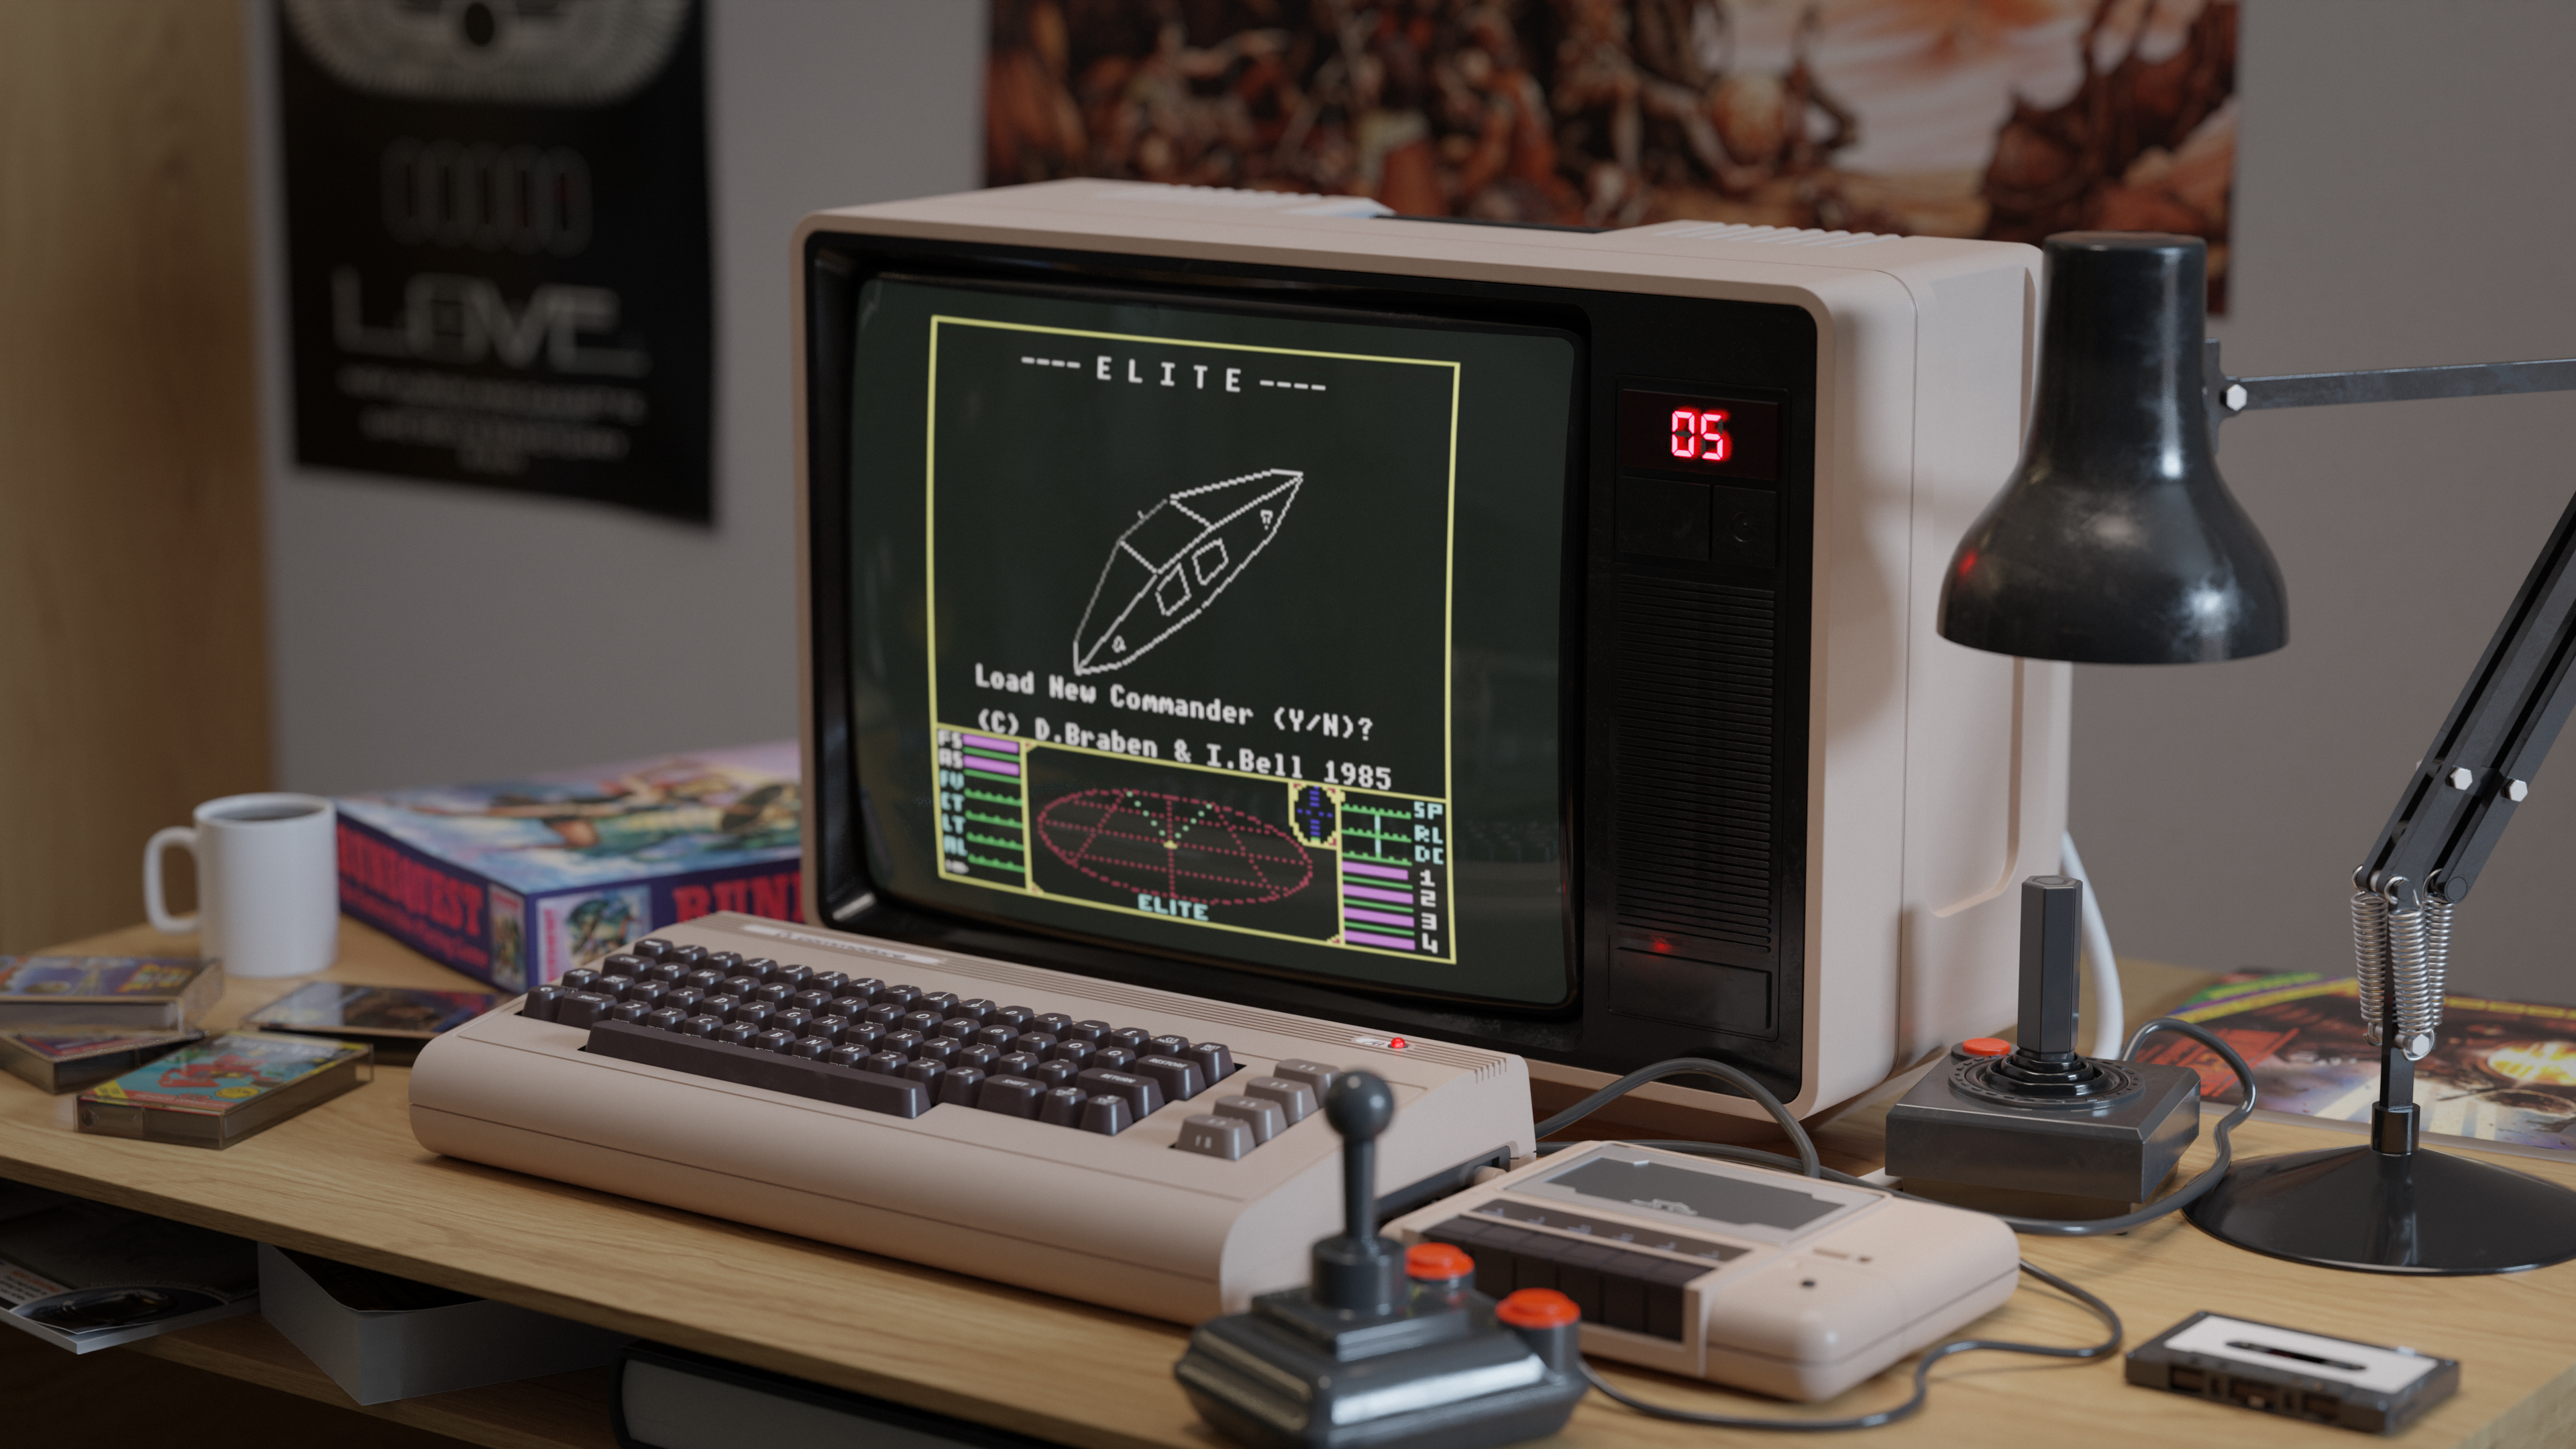 Commodore 64 nostalgia - Finished Projects - Blender Artists Community